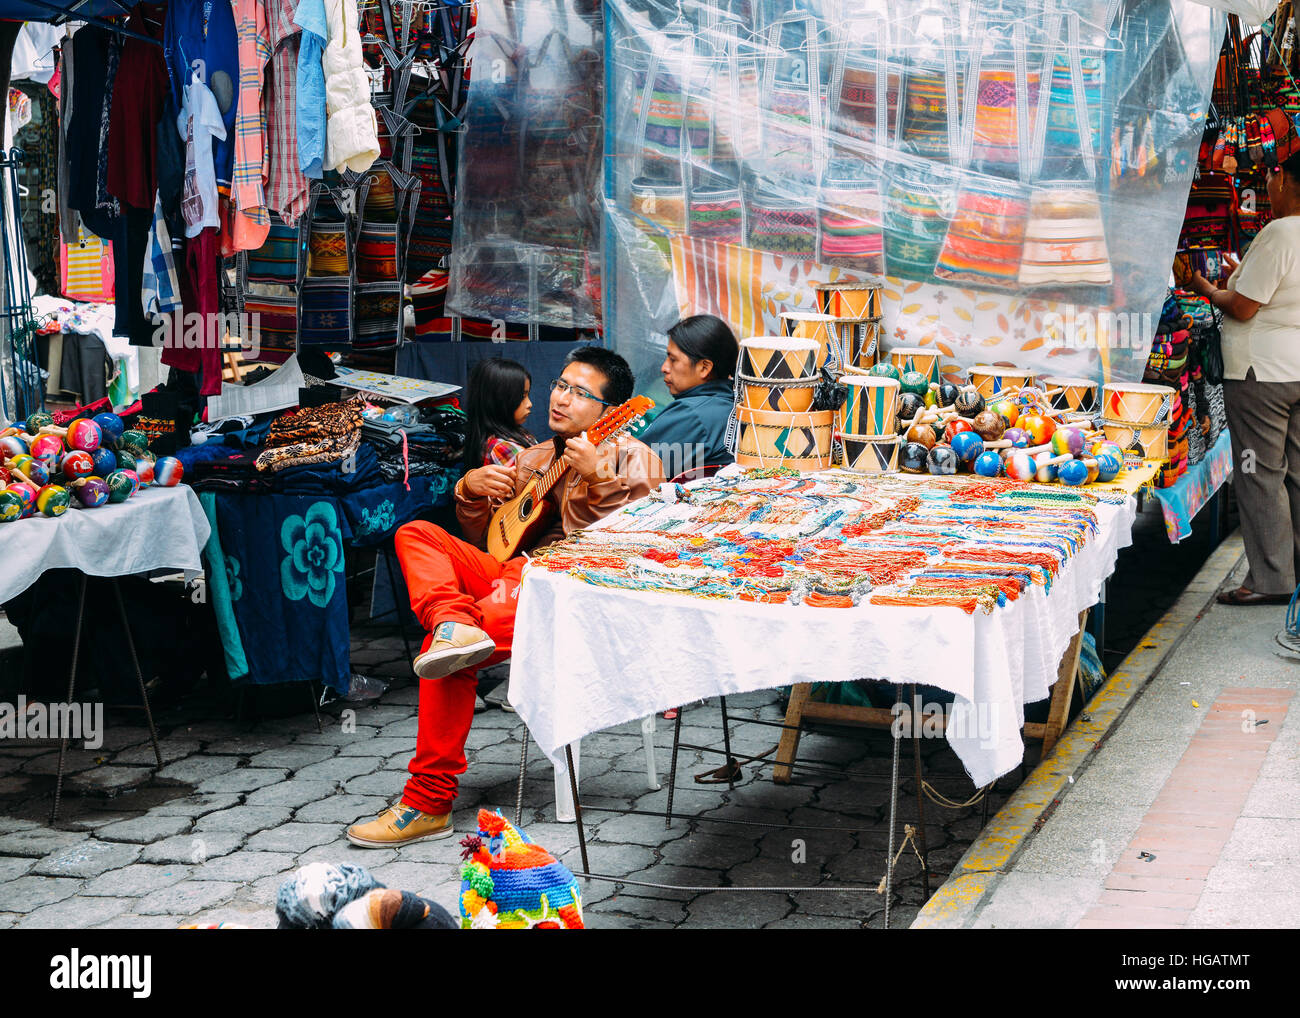 Traditional street market in Otovalo, Ecuador, full of textiles, fruit and vegetables, spices, jewerly and indigenous carvings Stock Photo